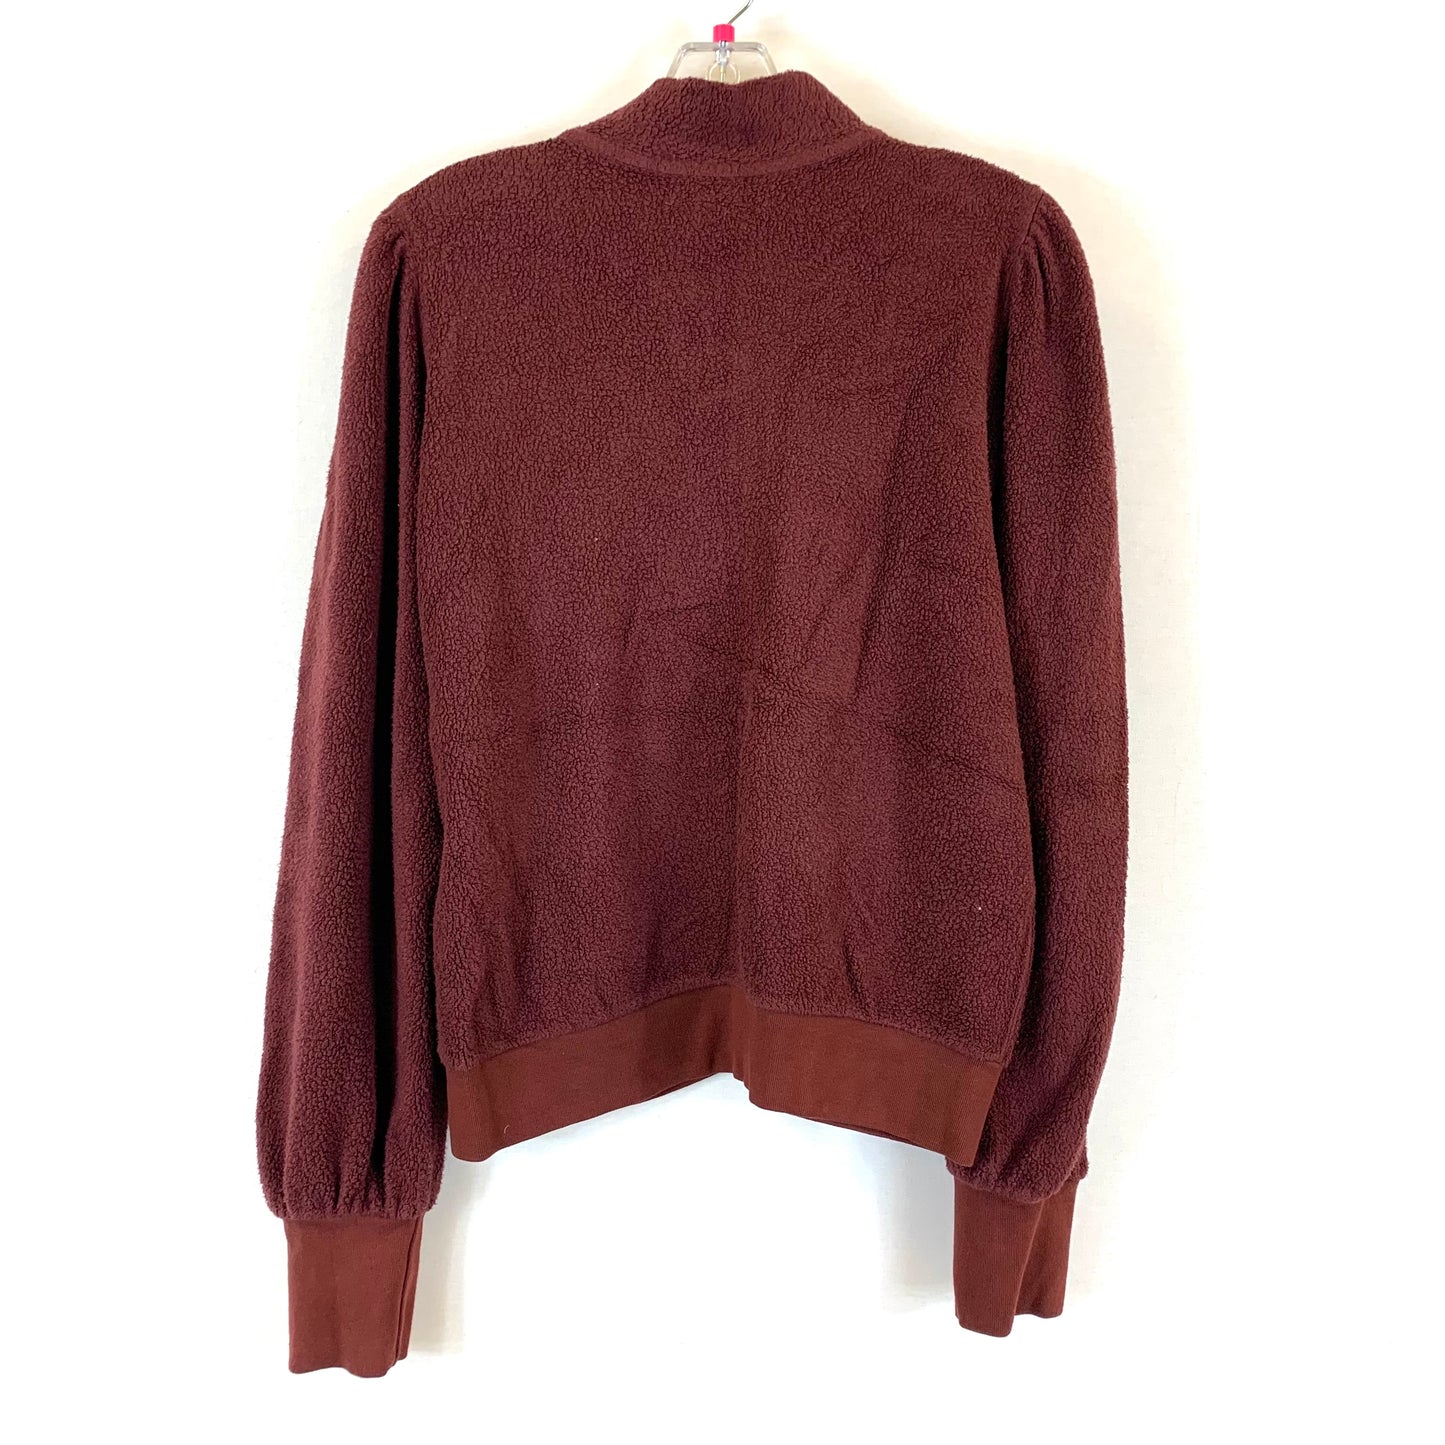 Top Long Sleeve By Sundry  Size: S